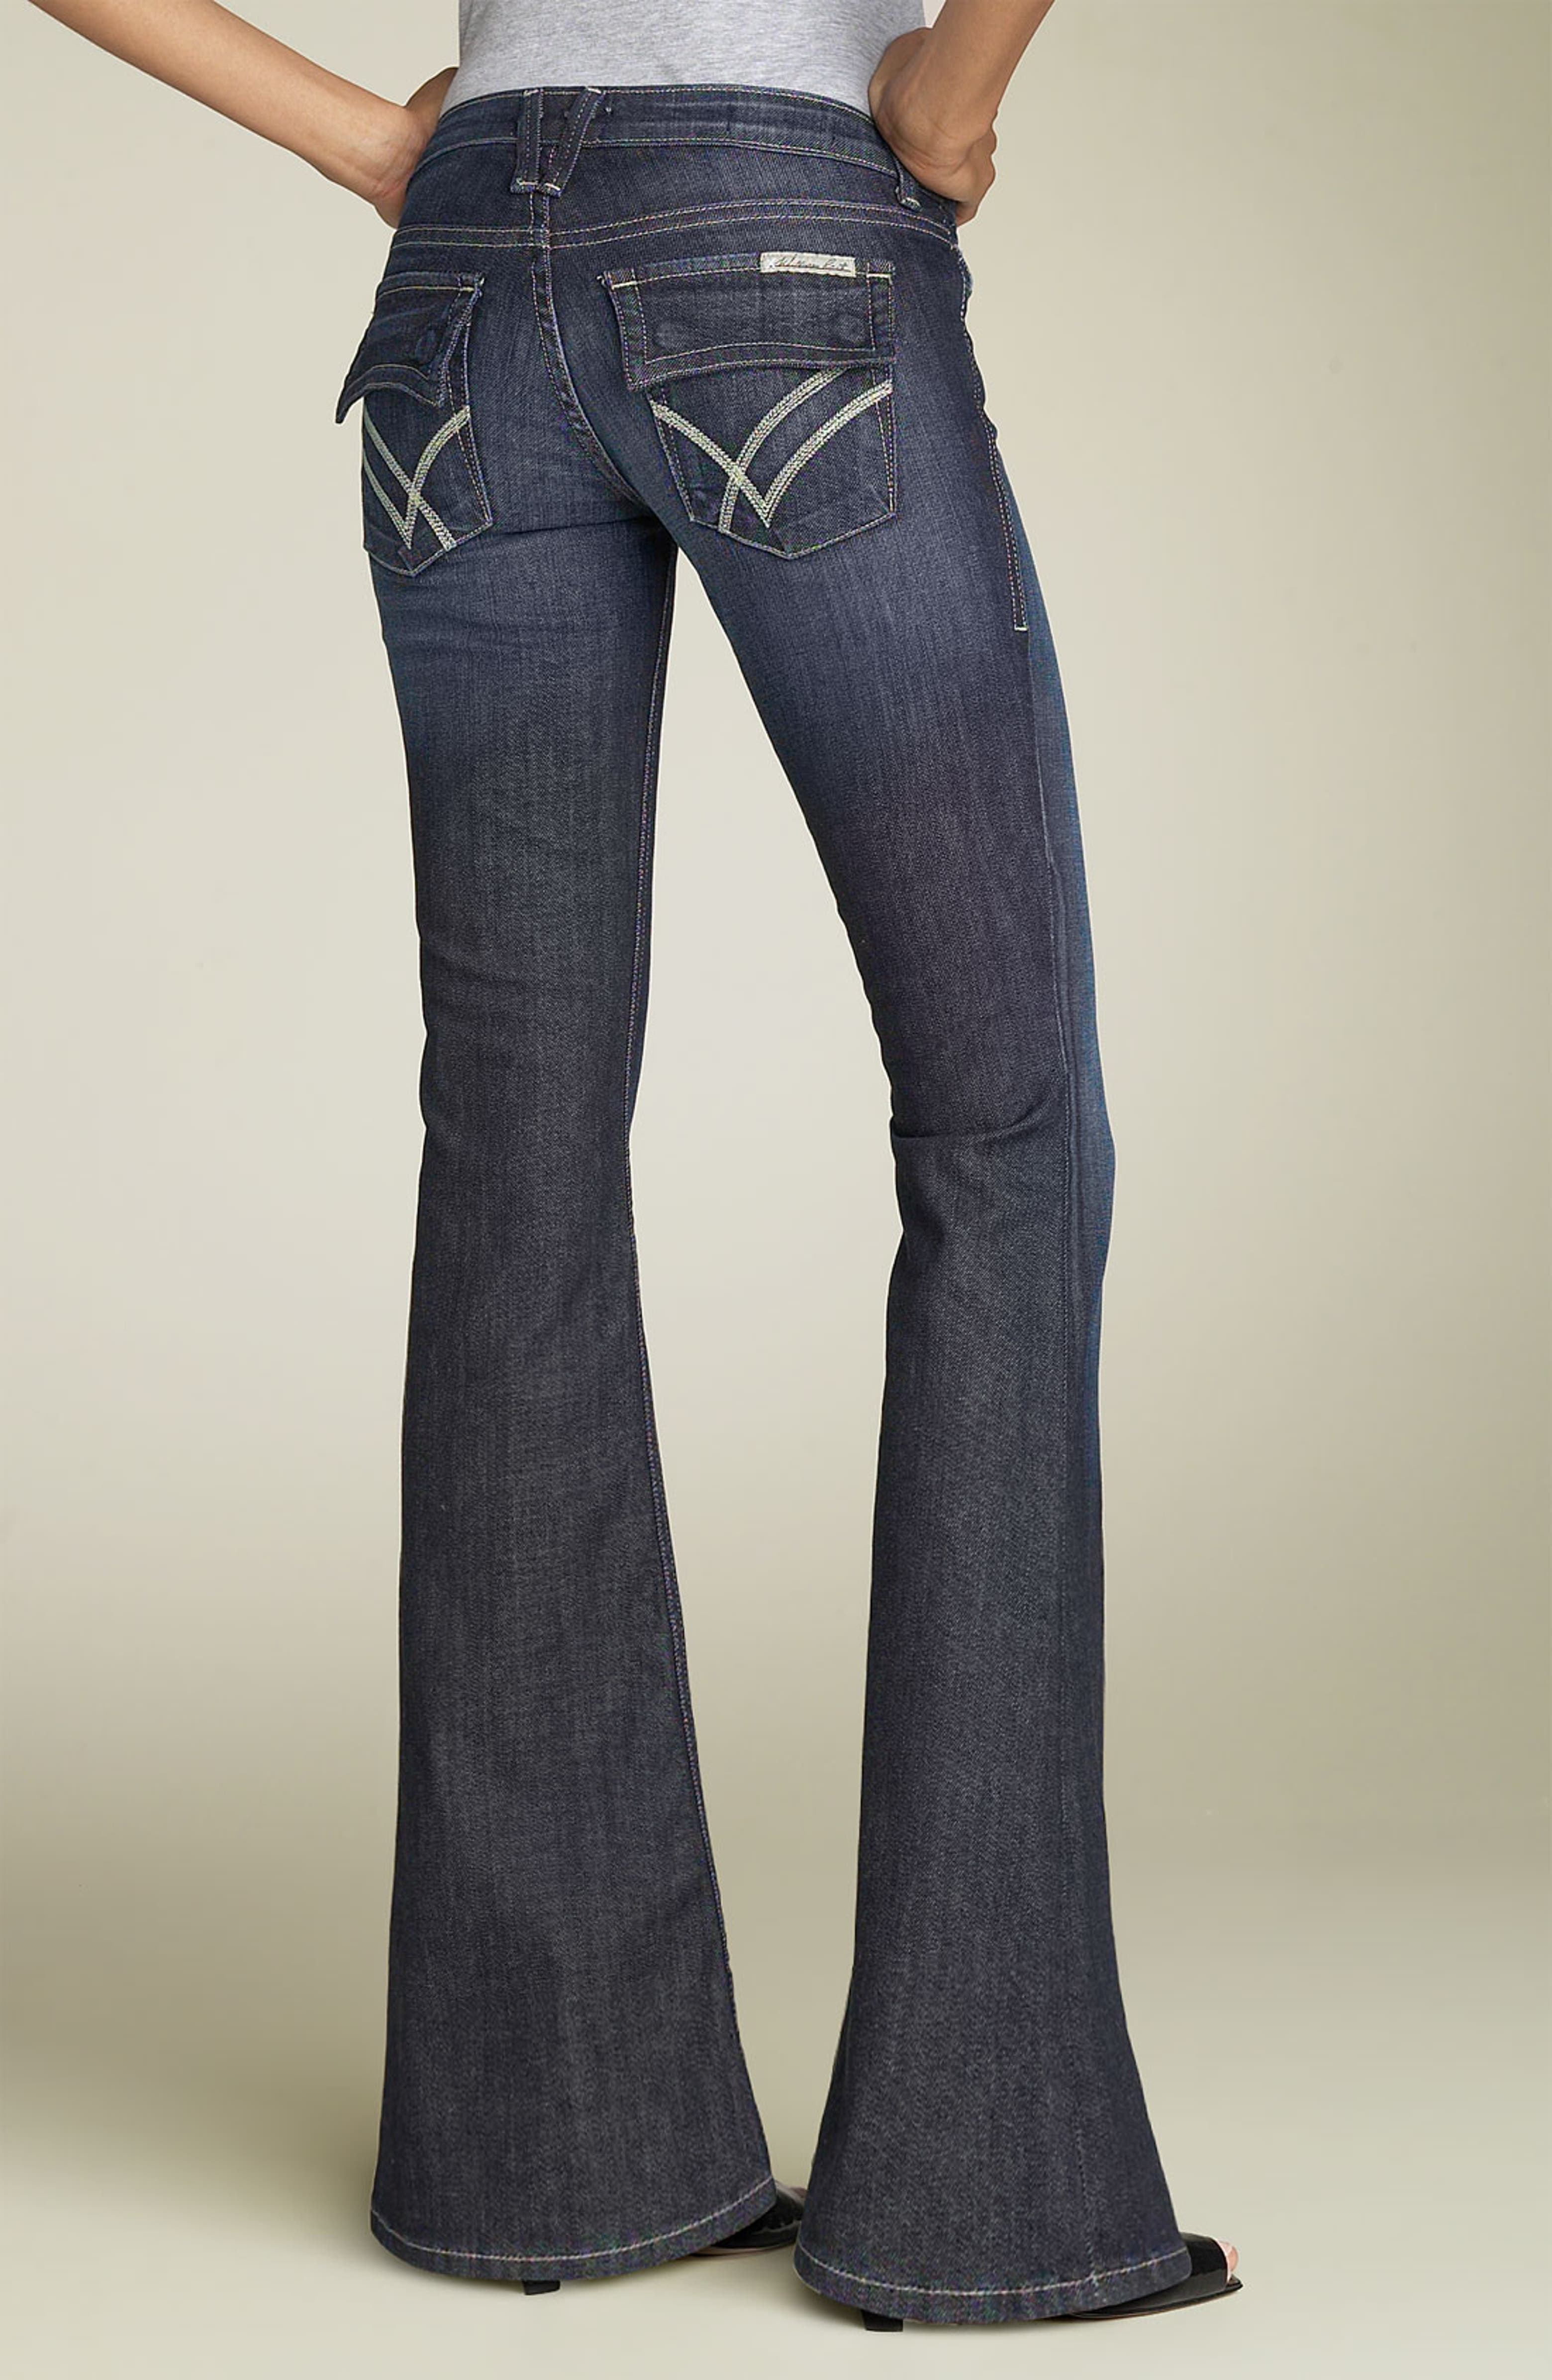 William Rast 'Belle' Flare Stretch Jeans (Lagoon Wash) | Nordstrom